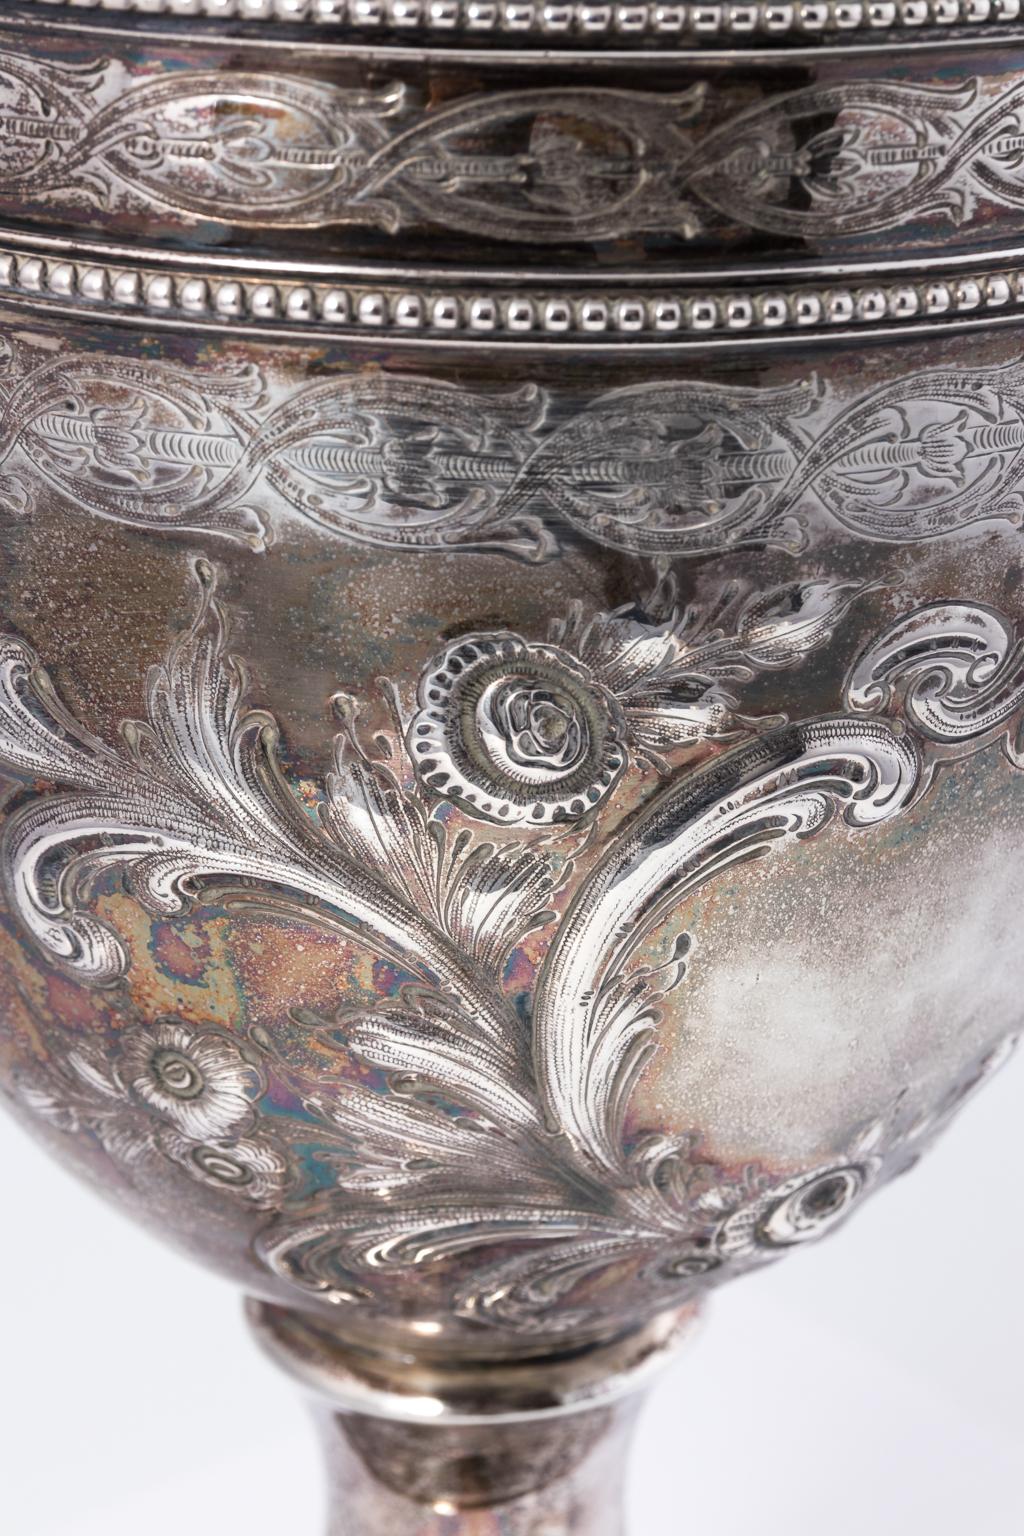 Unsigned but tested coin silver pitcher in the Rococo Revival style that features beaded trim and is hand chased with intricate scrolled foliate designs, circa mid-19th century. The pitcher weighs 30.915 troy ounces.